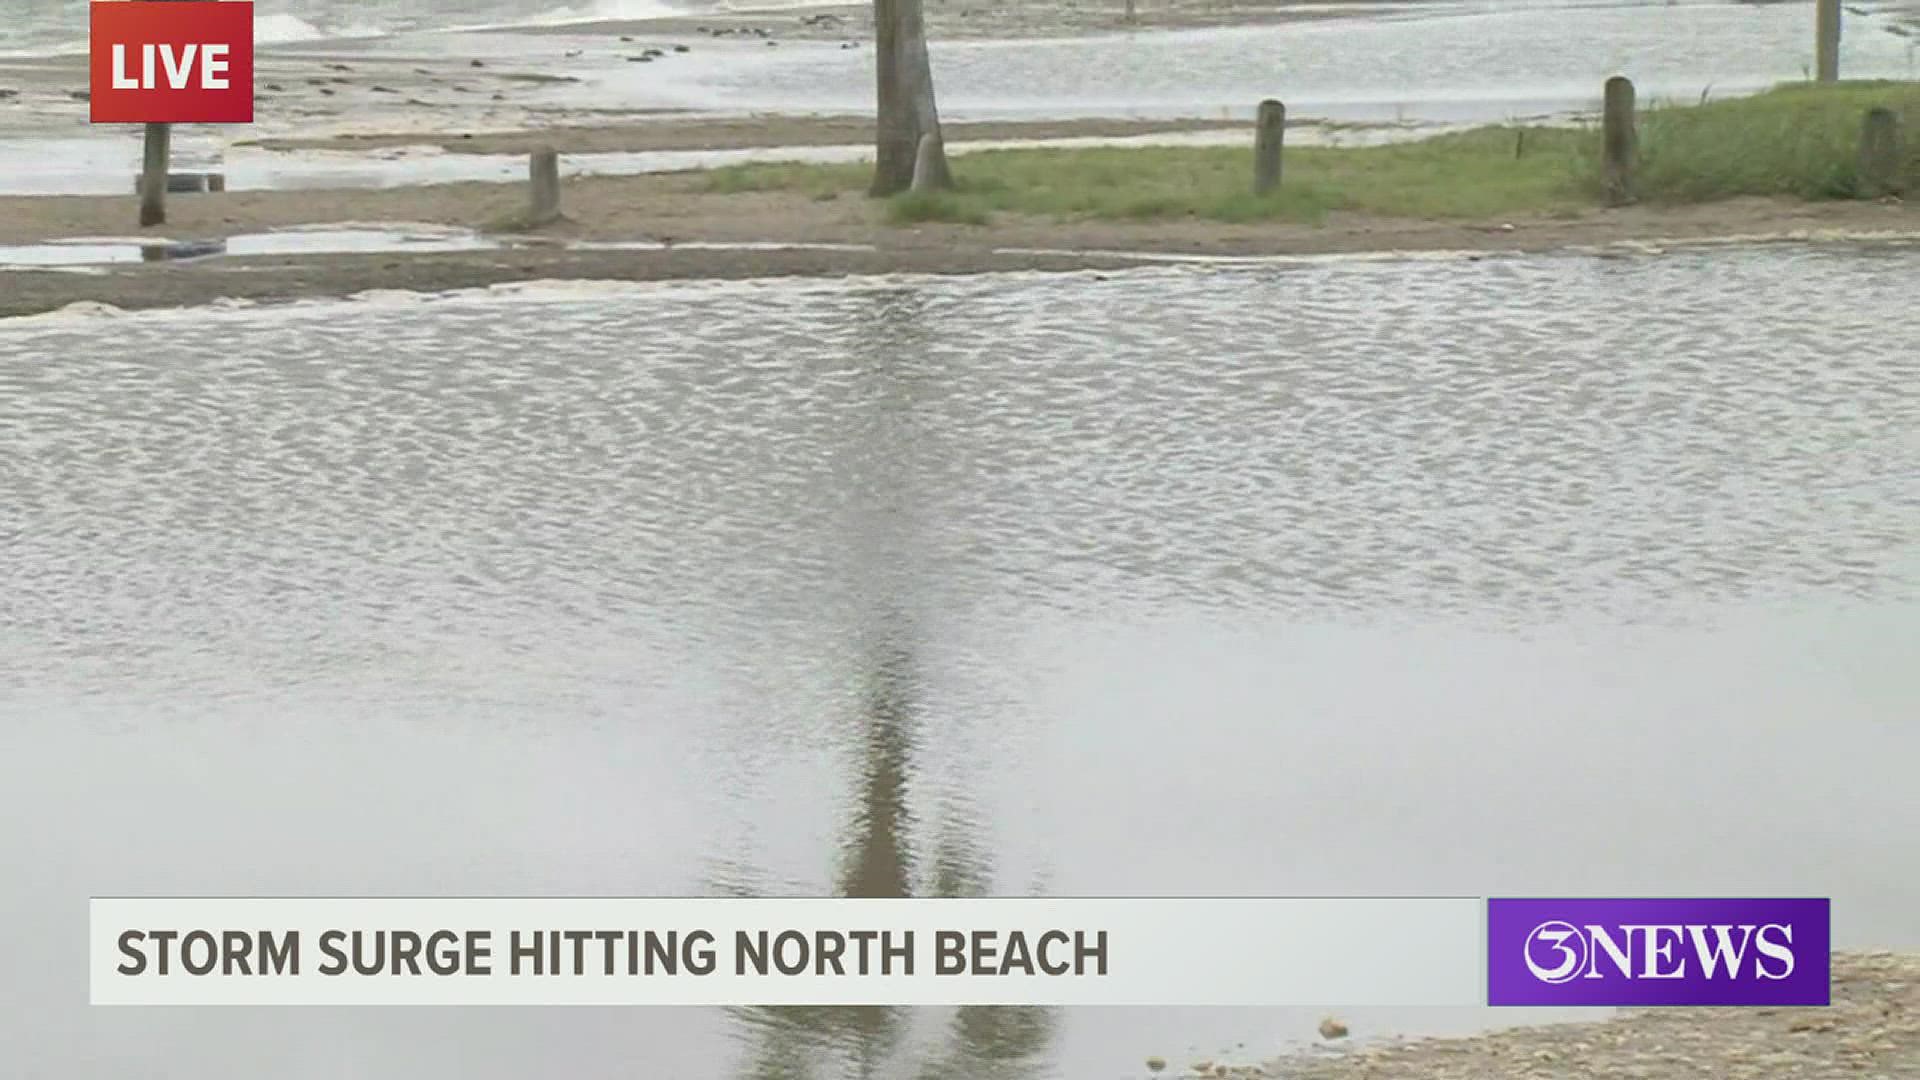 Some areas on North Beach have been barricaded off due to flooding.